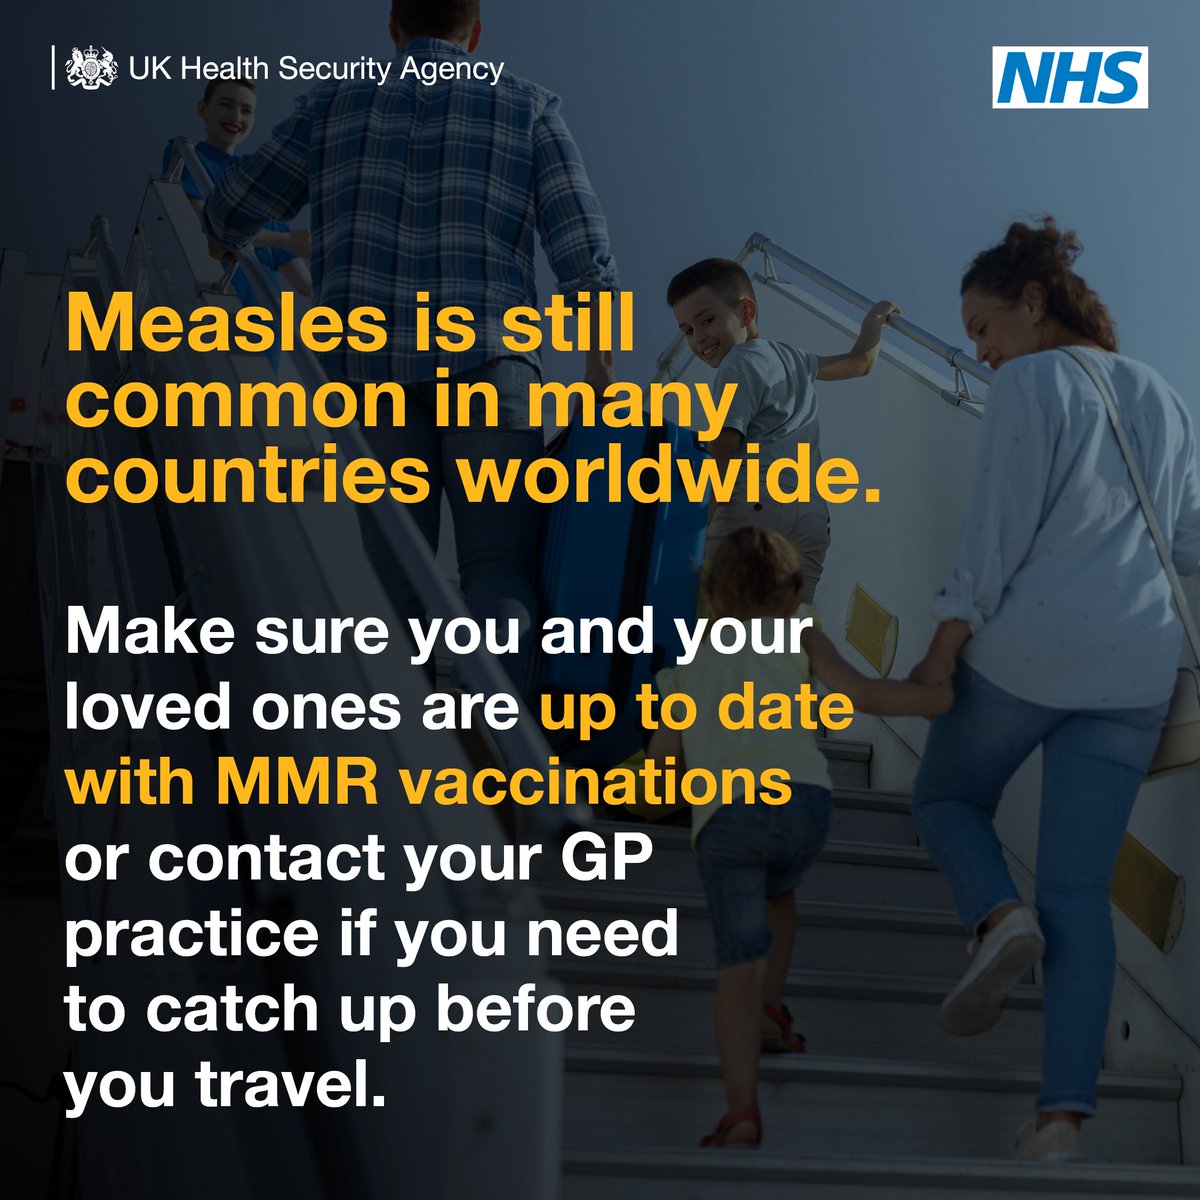 Measles can have serious and sometimes fatal consequences, and is still common in many countries worldwide. Before you travel, make sure you & your loved ones are up to date with #MMR vaccinations.